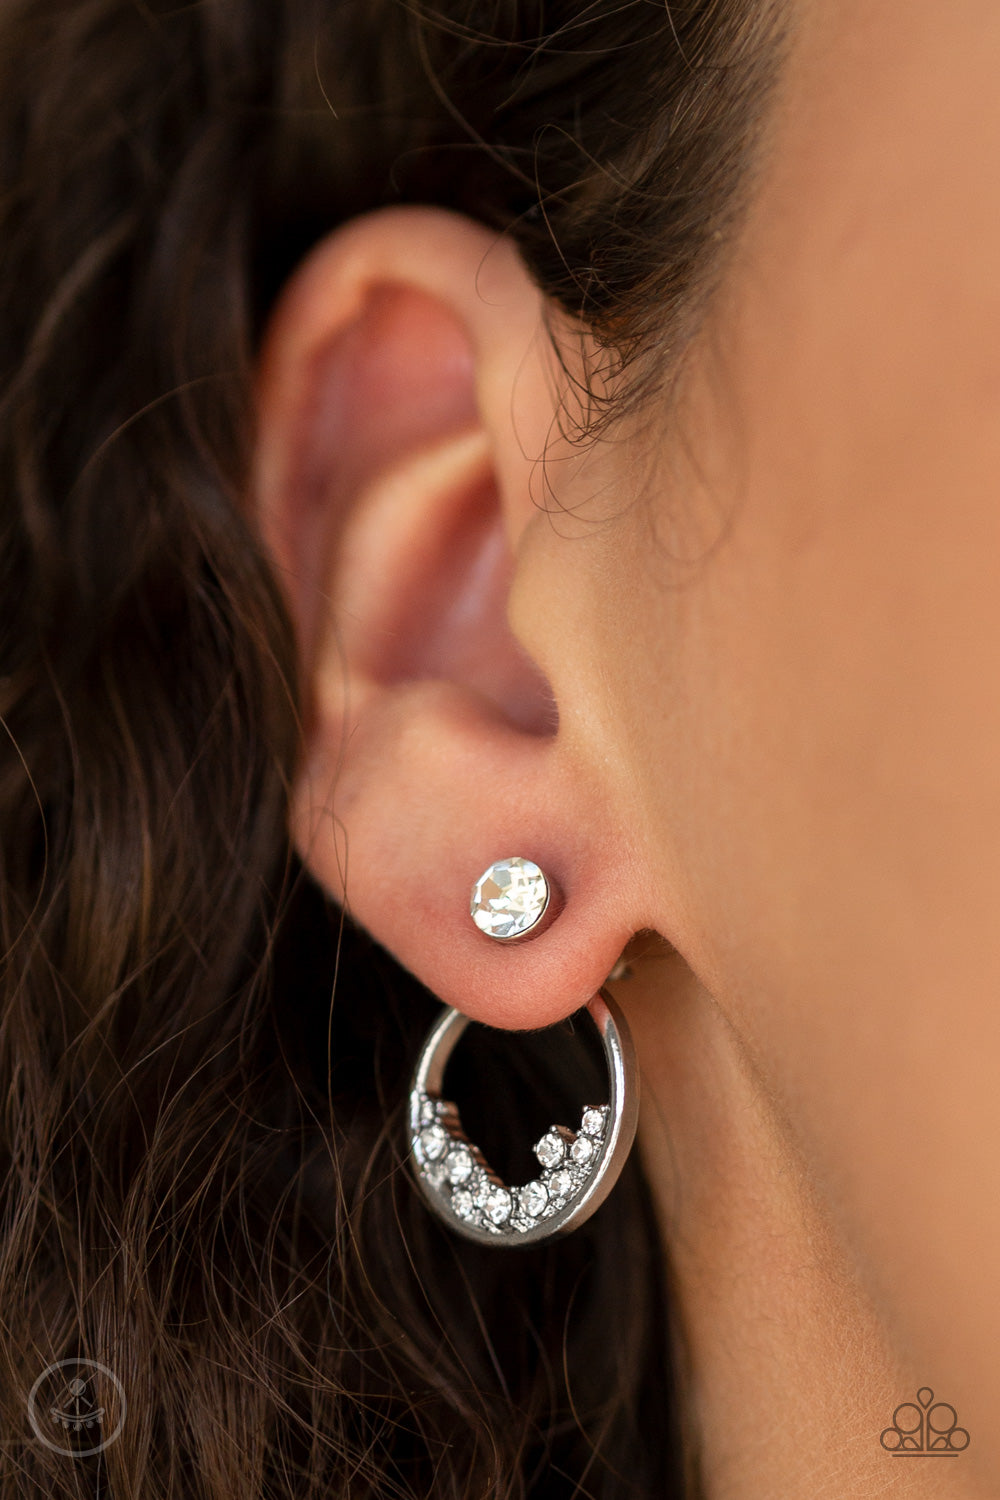 Rich Blitz - White Double Sided Earring - Princess Glam Shop